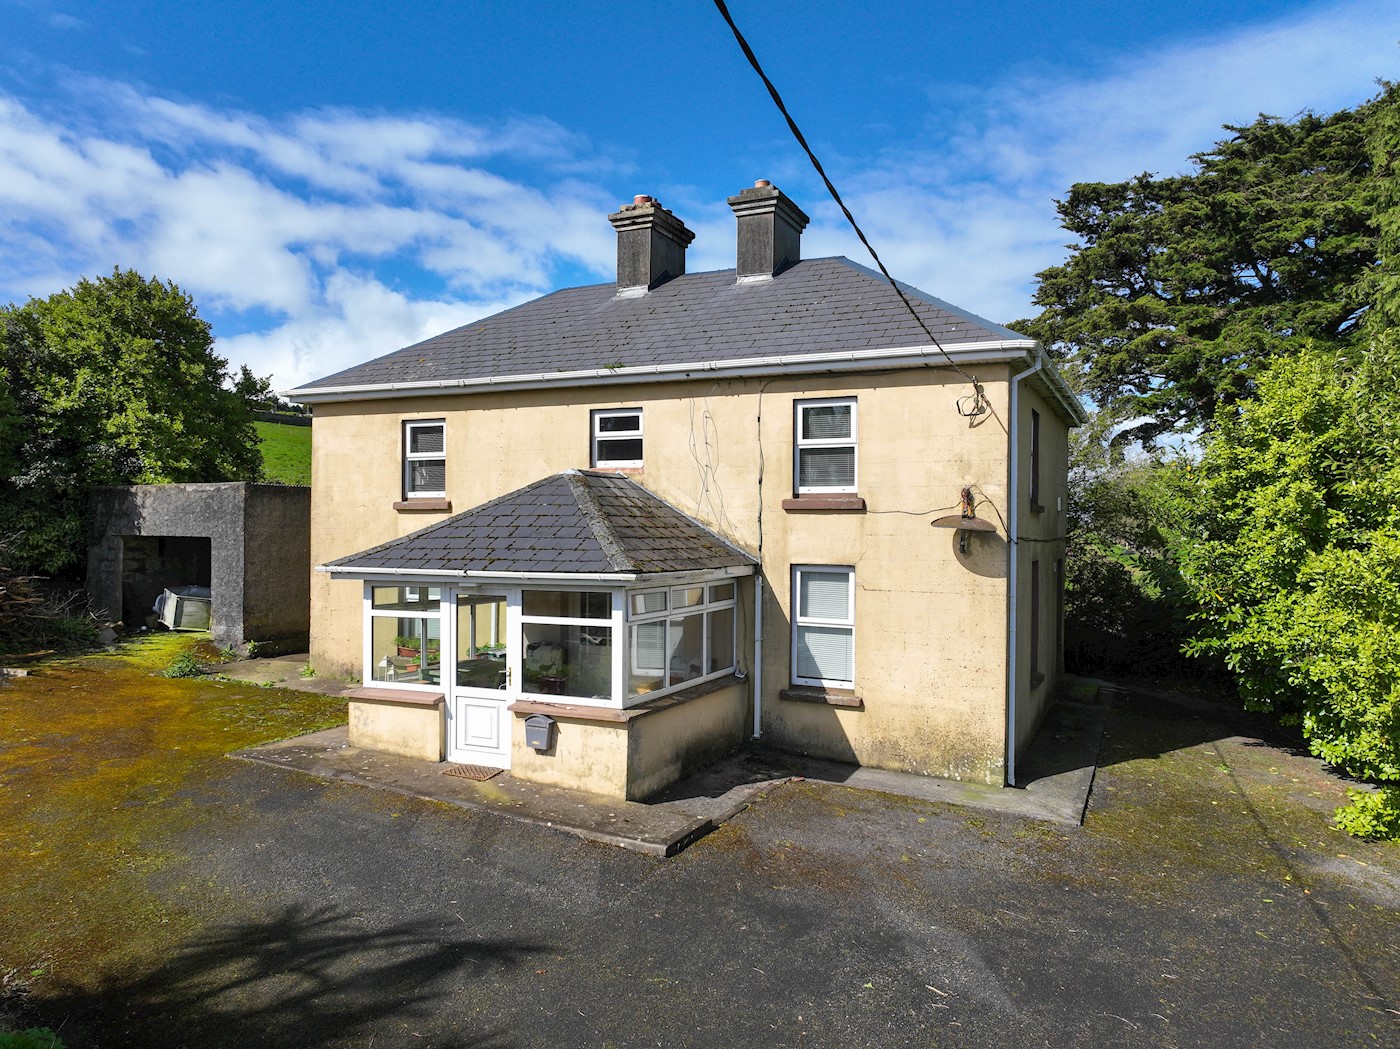 Ballinacourty, Ring, Dungarvan, Co. Waterford, X35 K761 1/11